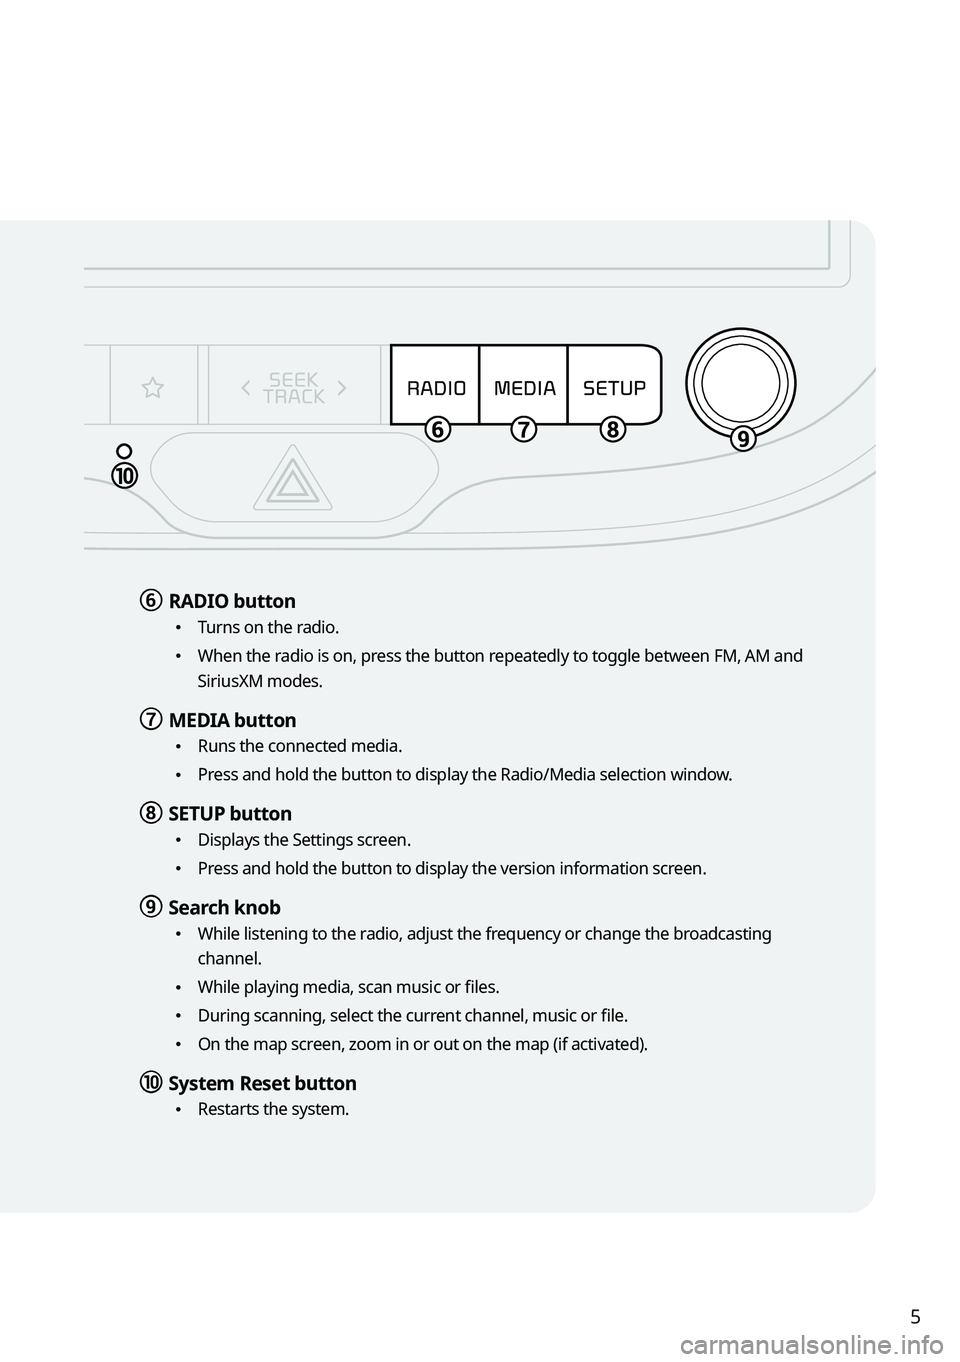 KIA SOUL 2023  Quick Reference Guide 5
f f RADIO button
 •
Turns on the radio.
 •When the radio is on, press the button repeatedly to toggle between FM, AM and 
SiriusXM modes.
g g MEDIA  button
 •
Runs the connected media.
 •Pre